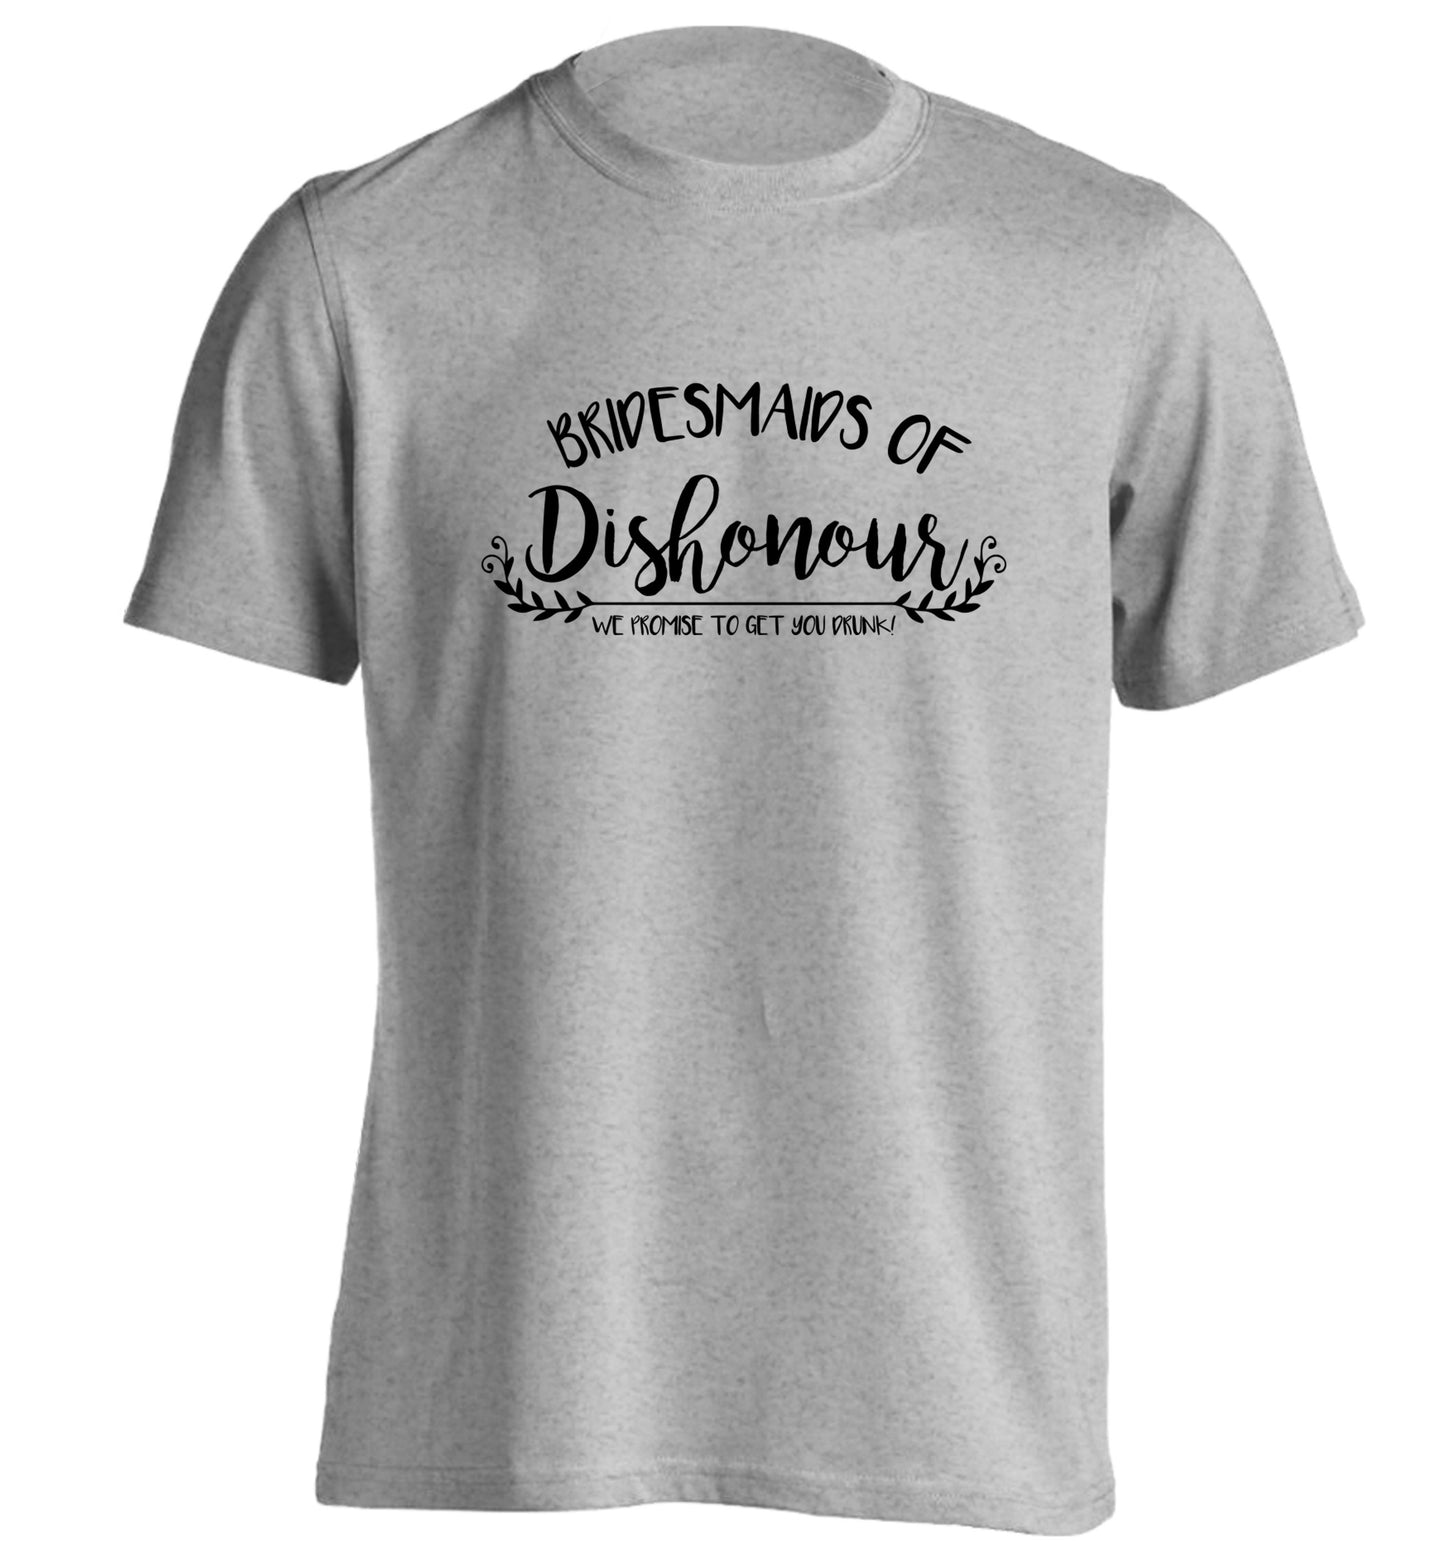 Bridesmaids of Dishonour we promise to get you drunk! adults unisex grey Tshirt 2XL